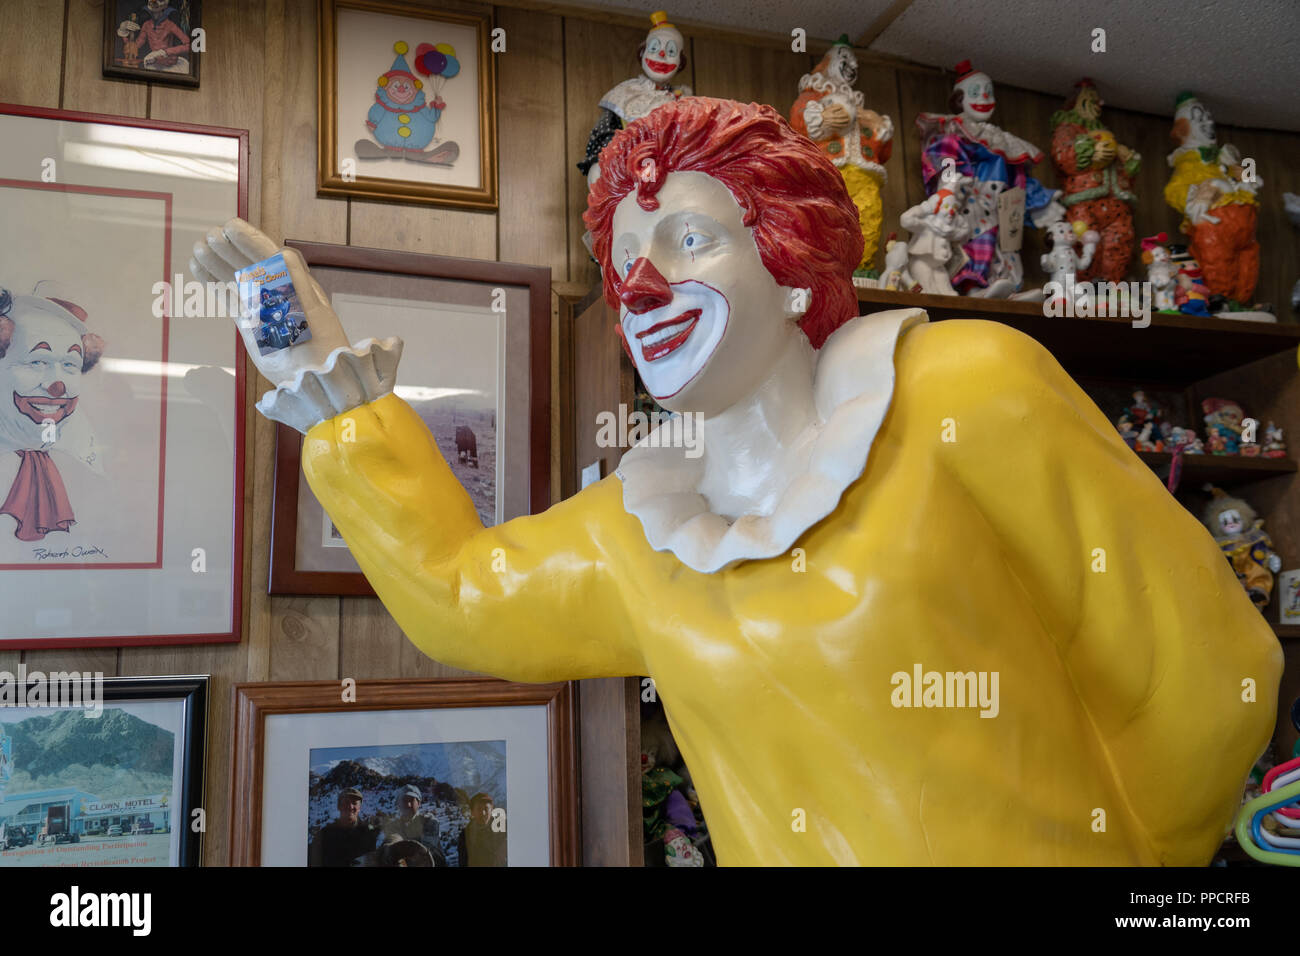 TONOPAH, NEVADA: Statue of the famous Ronald McDonald, the McDonalds mascot, inside of the Clown Motel, which has a large collection of clowns Stock Photo